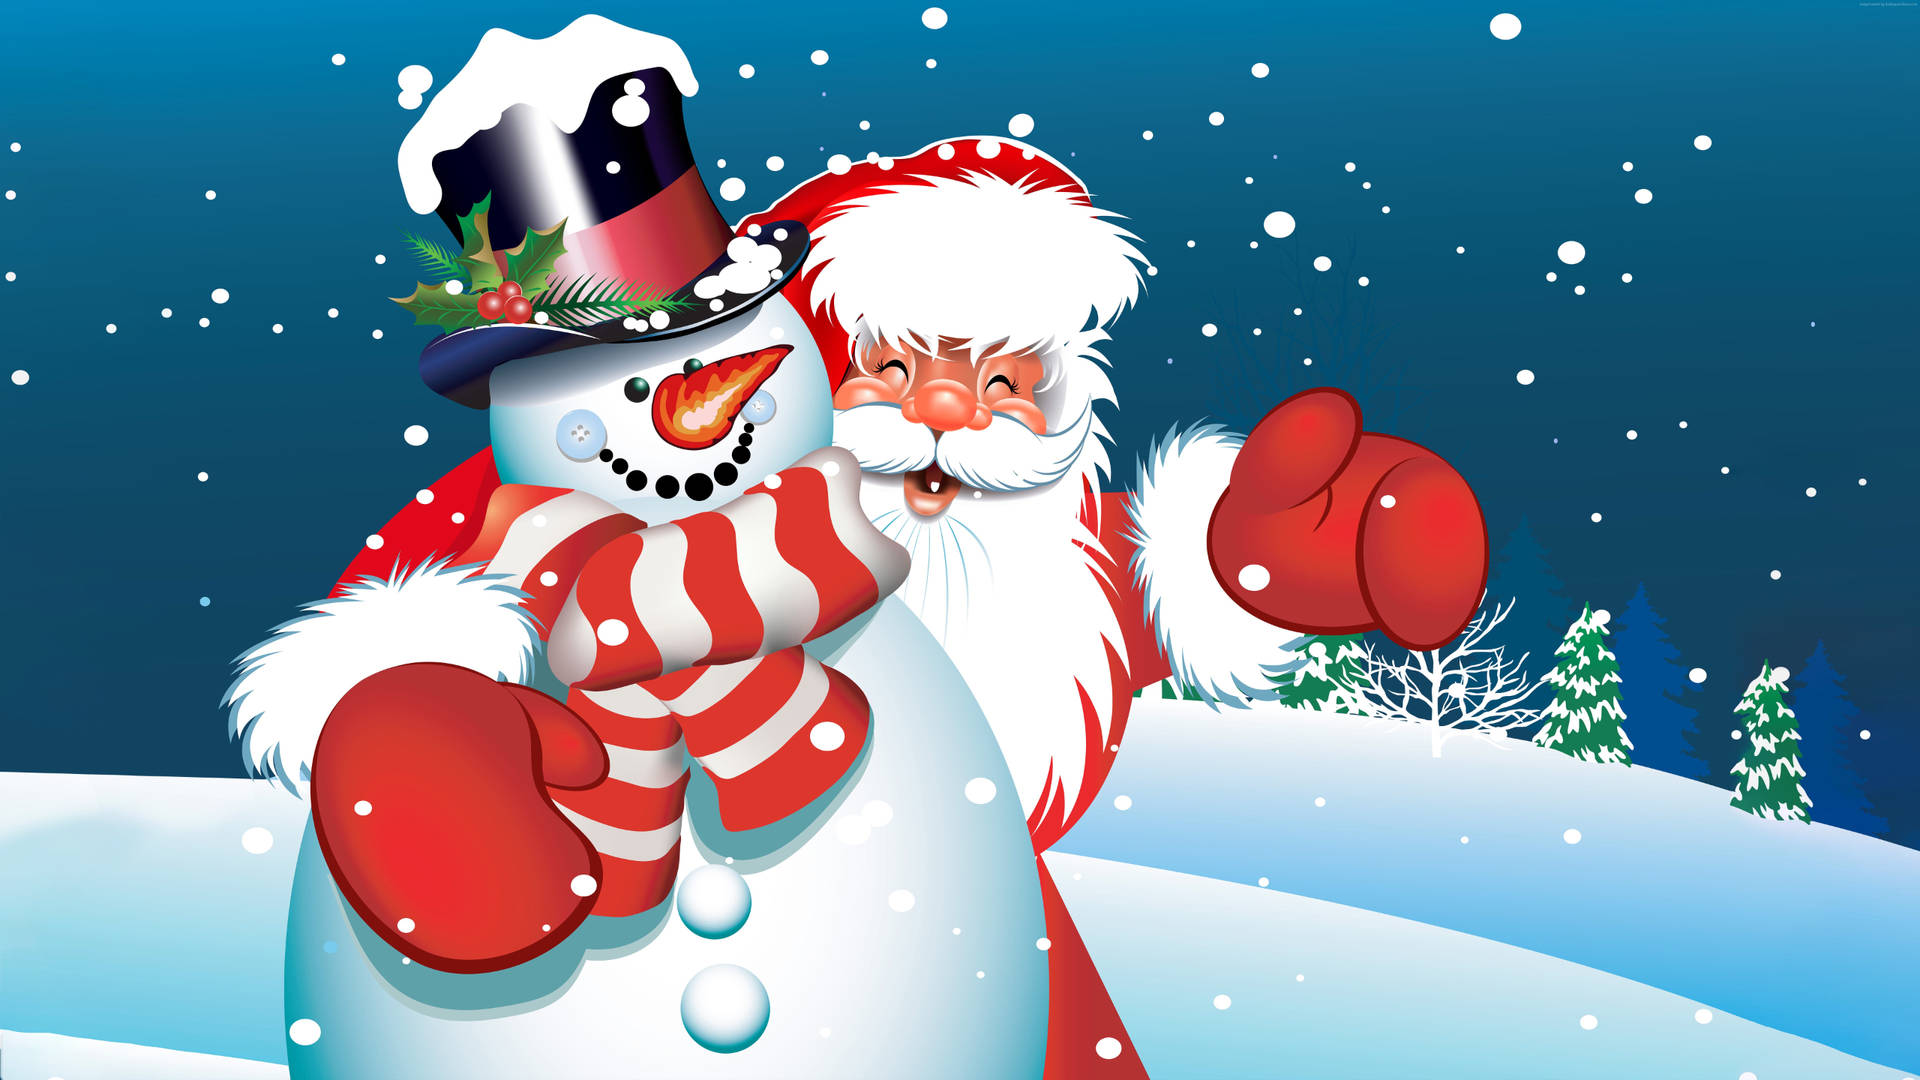 Animated Snowman And Santa Claus Background